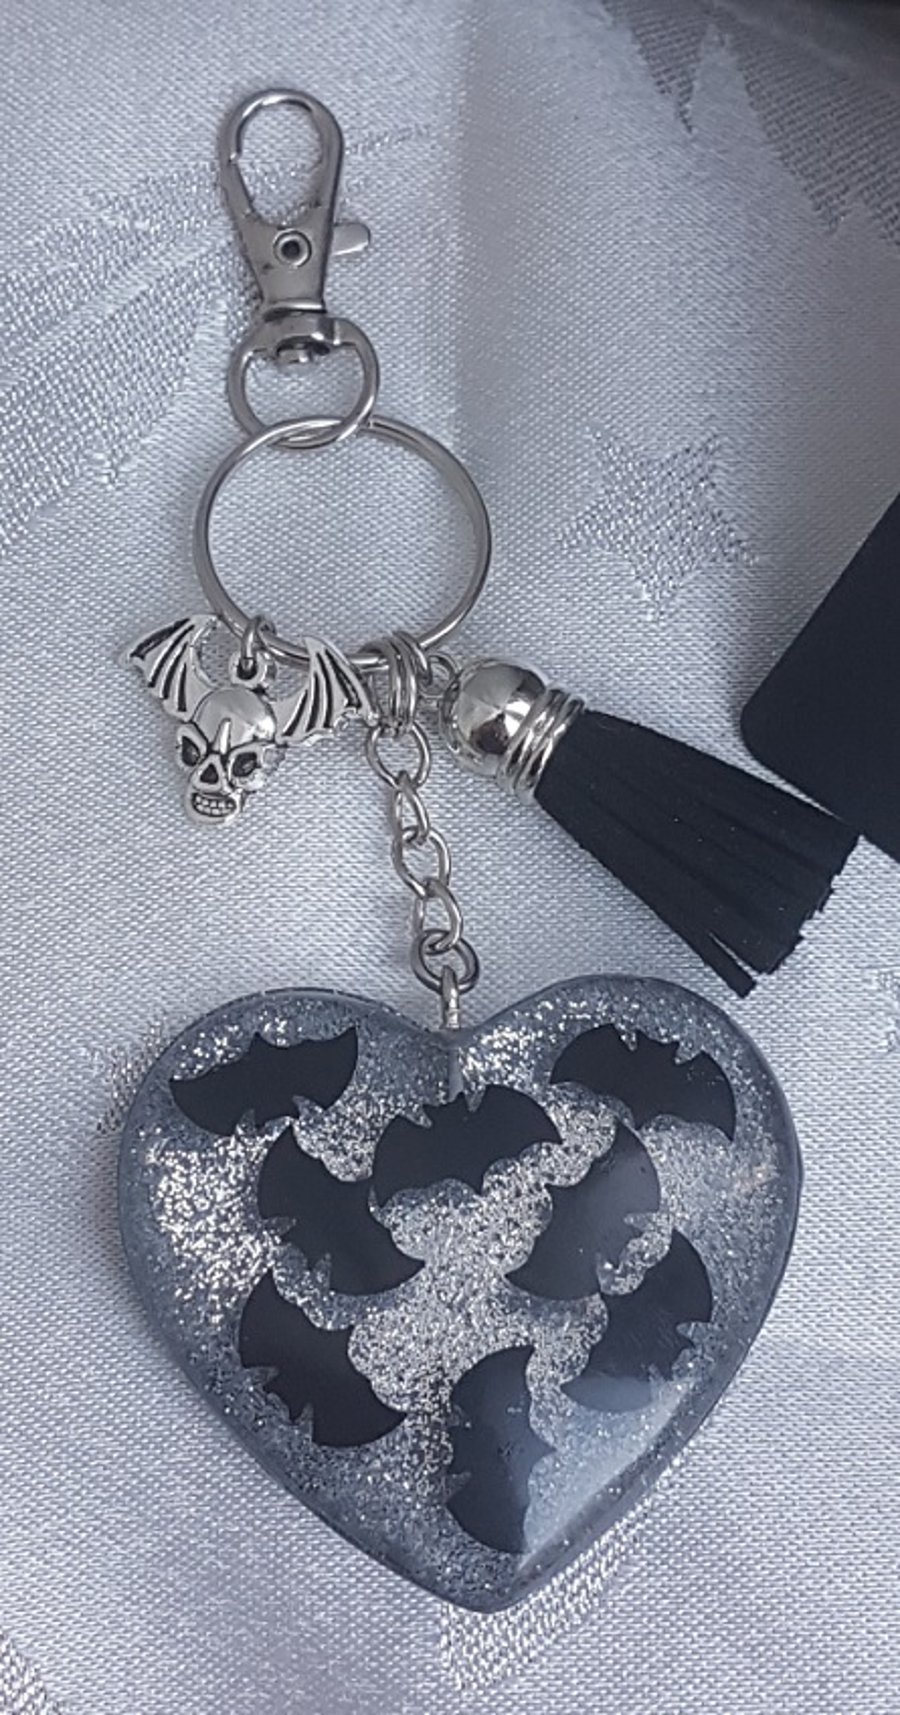 Large Resin Heart with Bats - Key Ring Key Chain Bag Charm.